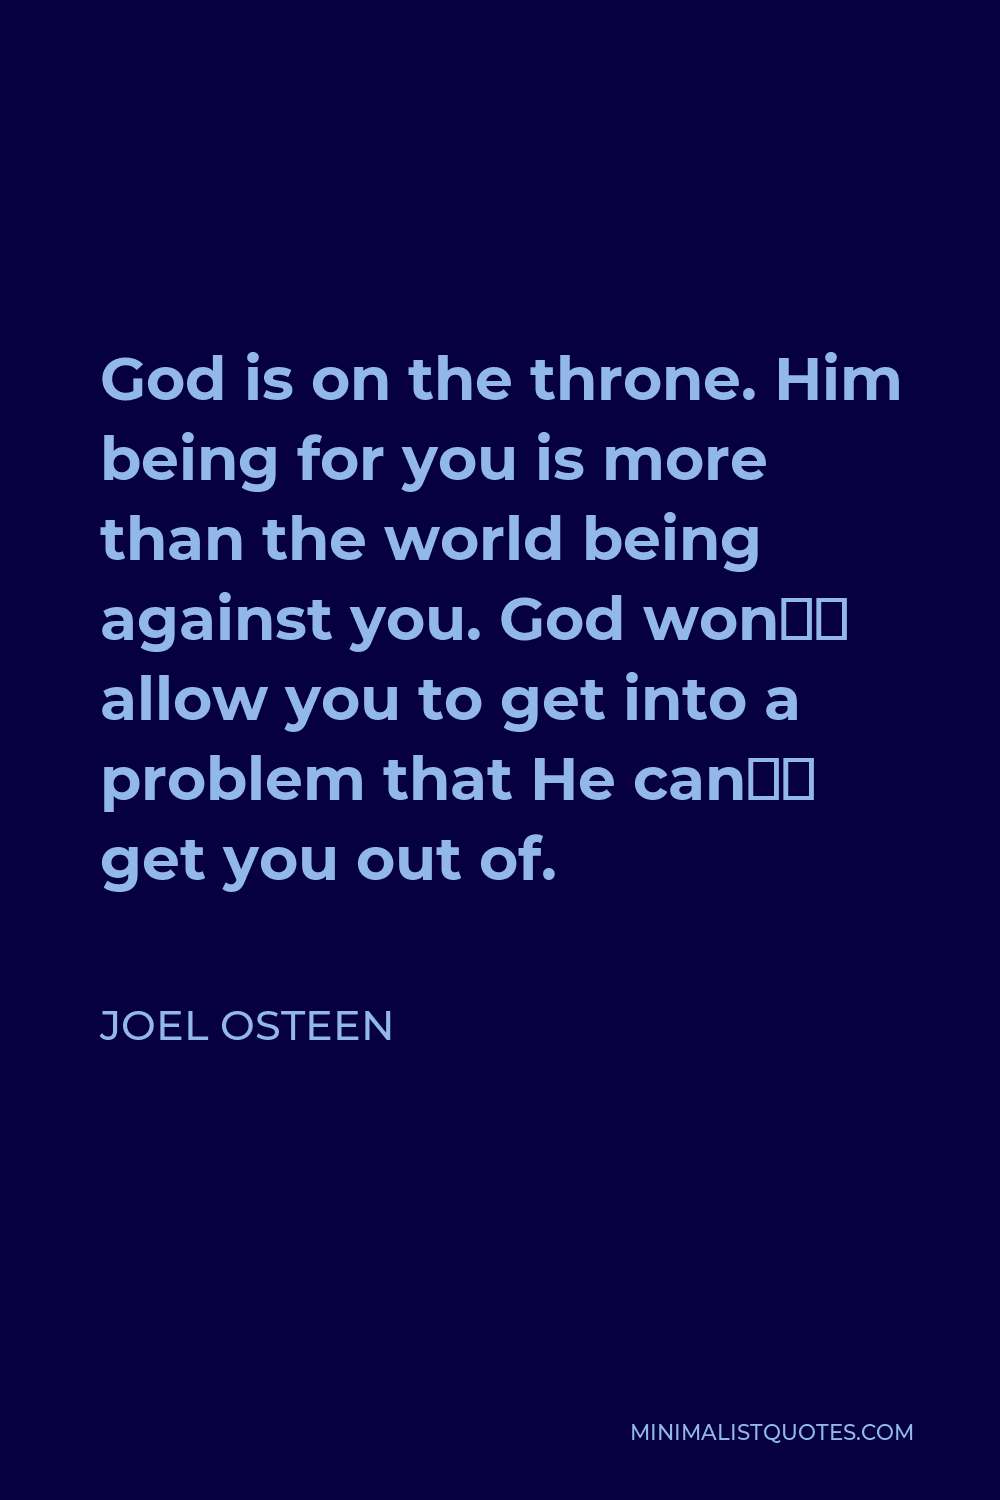 Joel Osteen Quote - God is on the throne. Him being for you is more than the world being against you. God won’t allow you to get into a problem that He can’t get you out of.